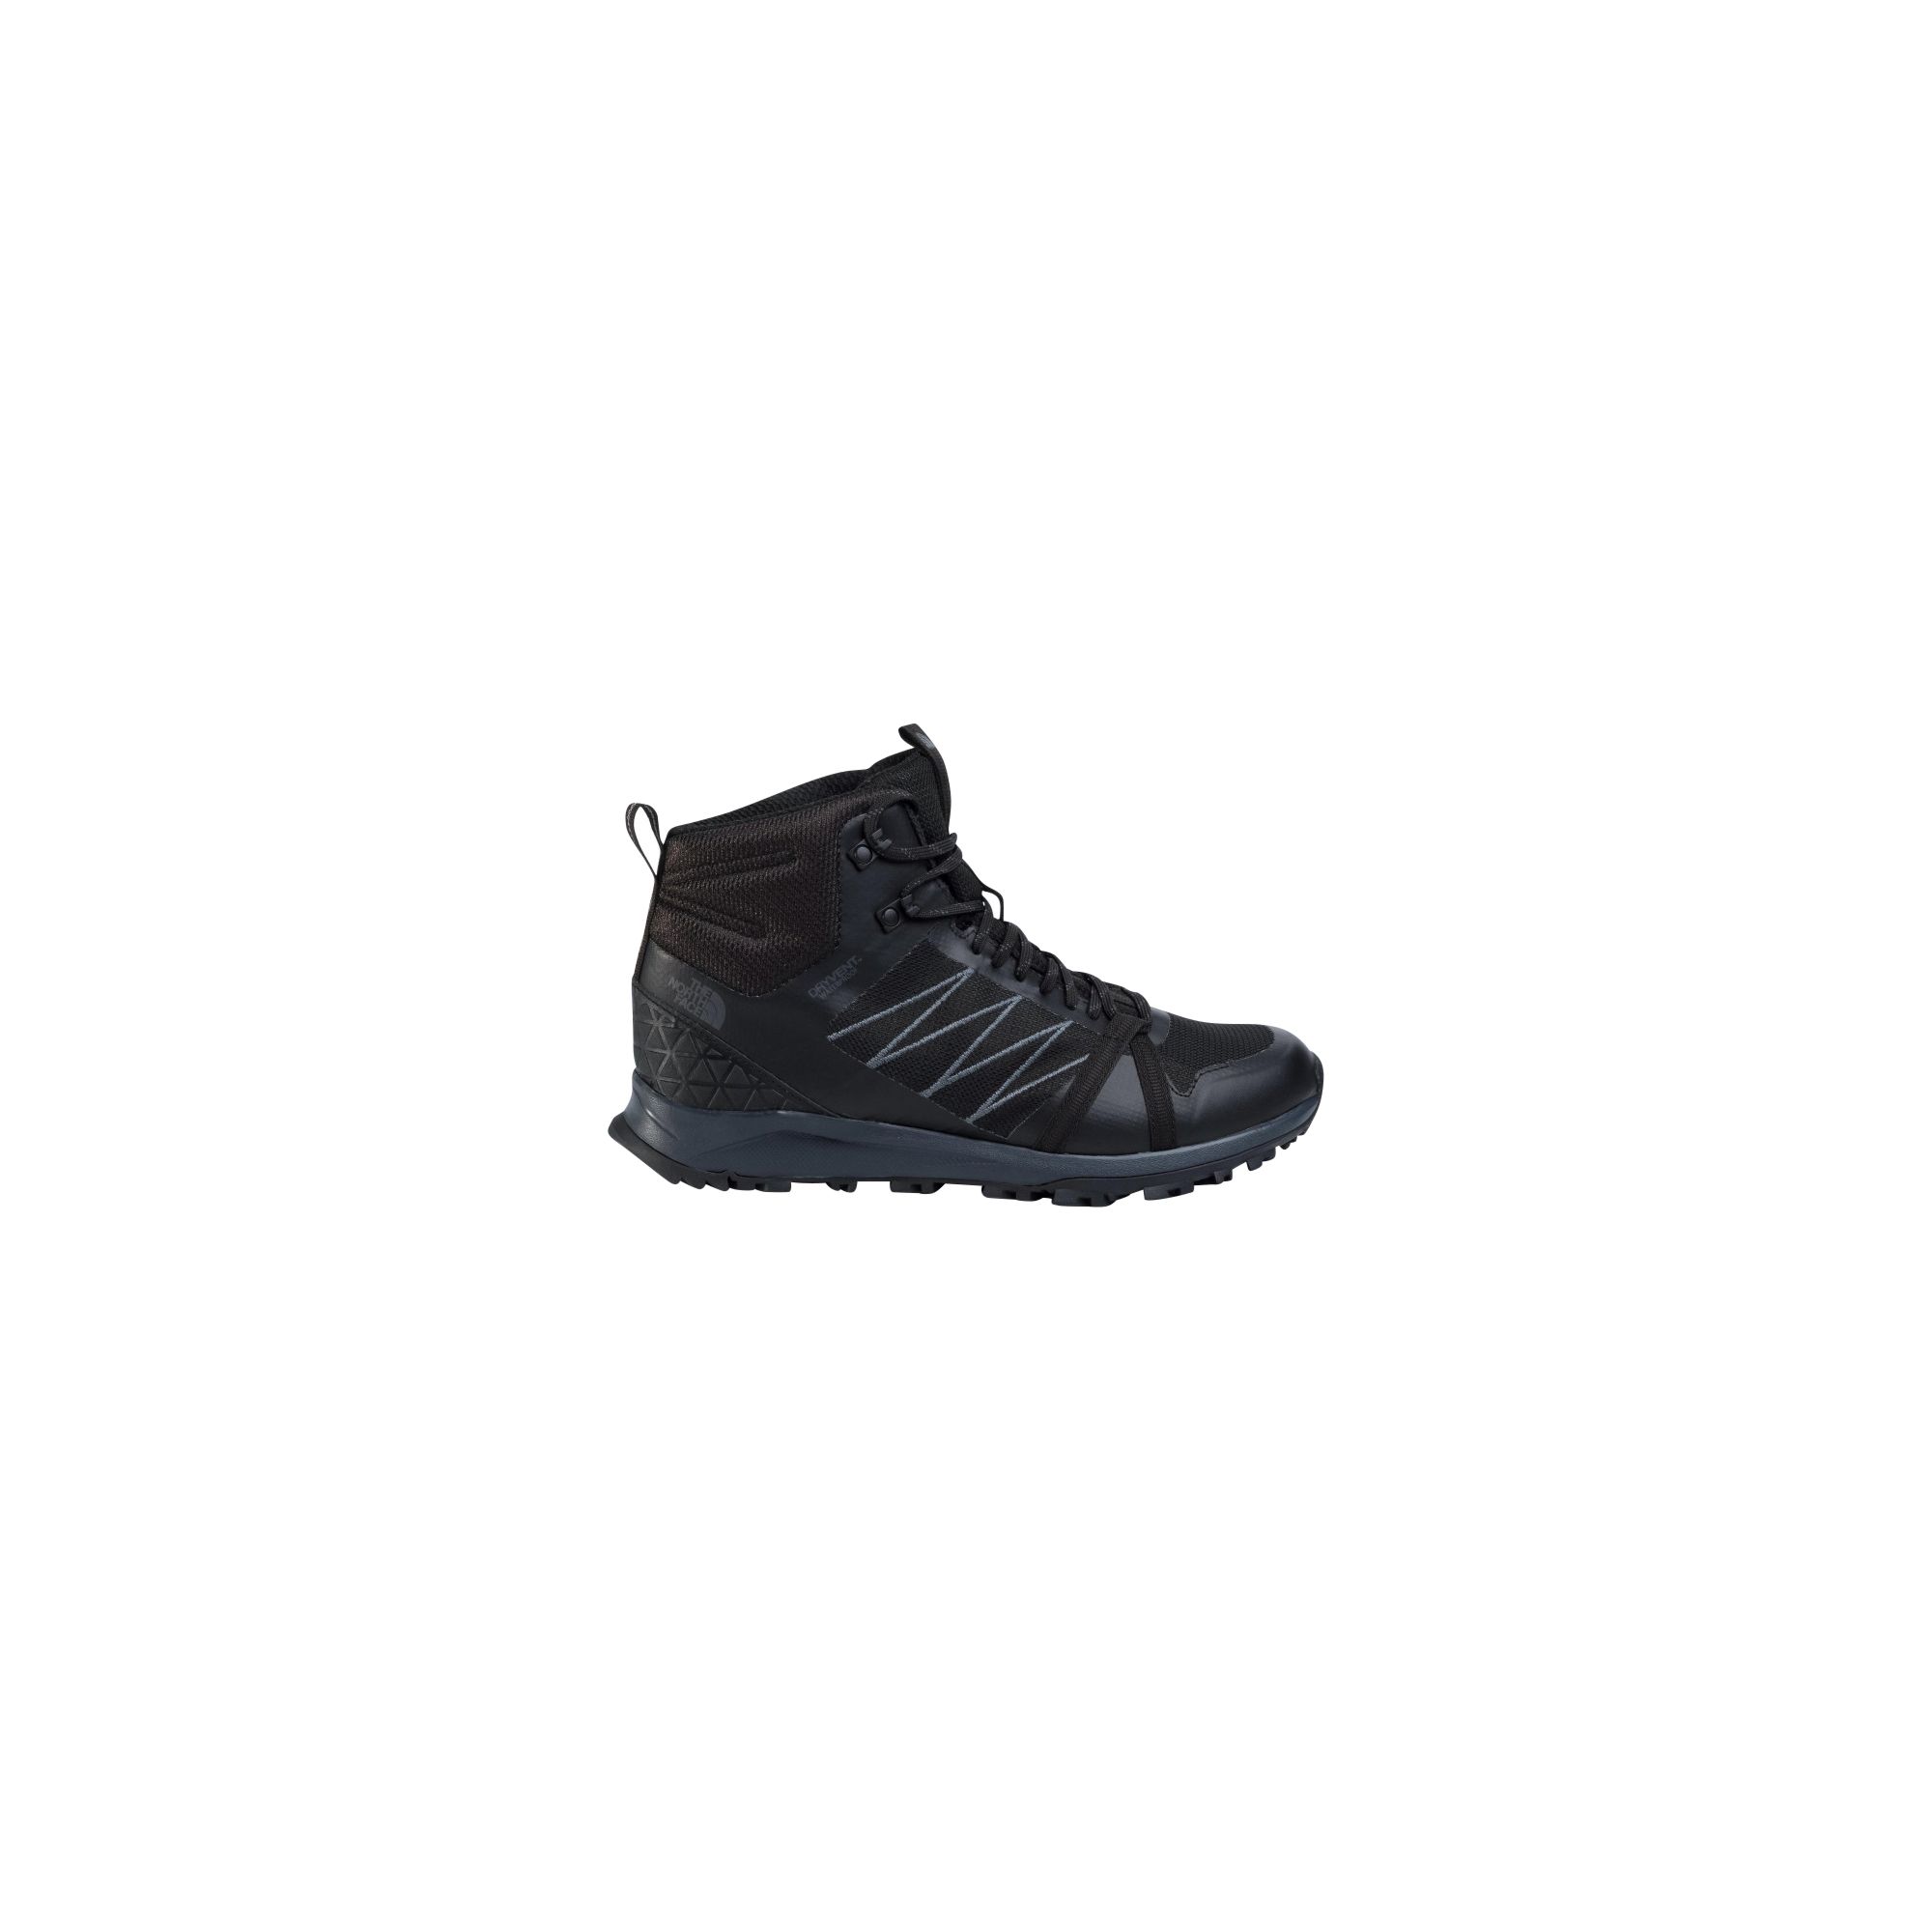 Litewave Fastpack Ii Mid The North Face - 2986609